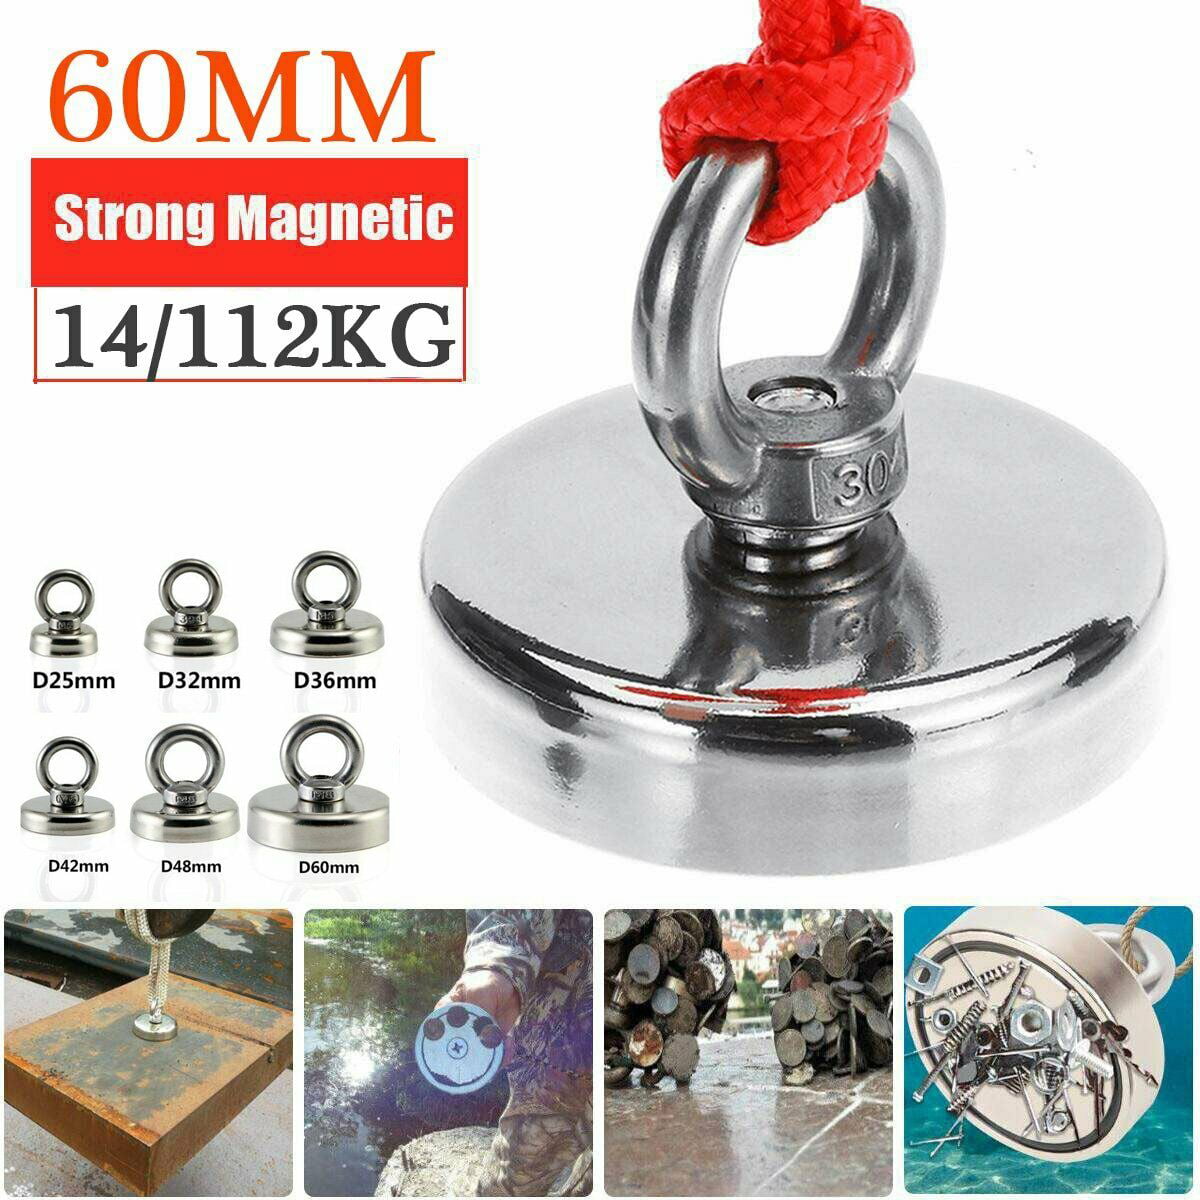 Strong Fishing Magnet Neodymium Magnetic Recover Detect Hunter powerful hook 